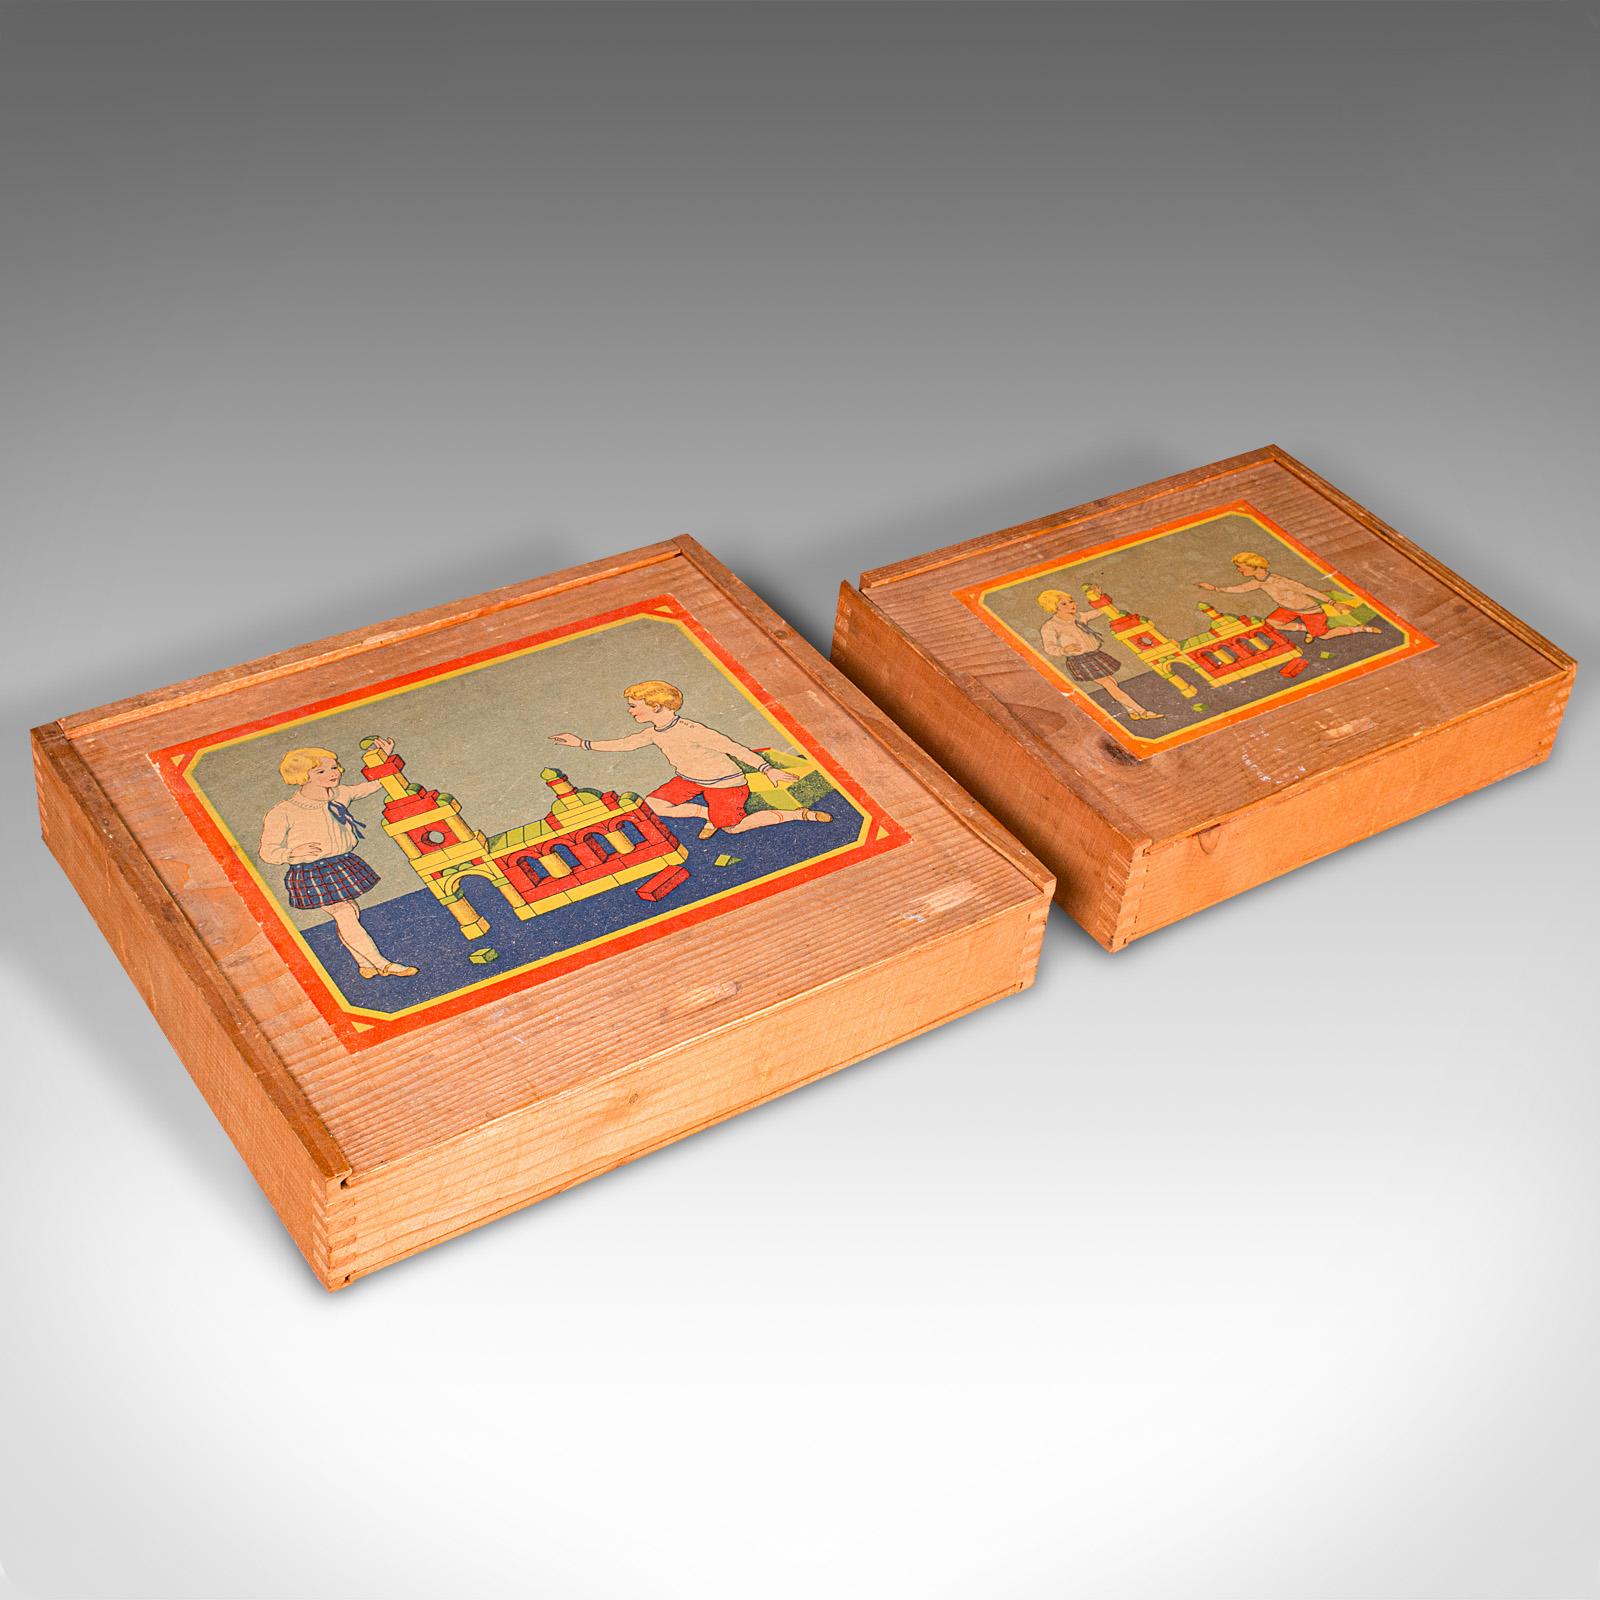 This is a set of two vintage building block cases. A German, pine toy box or baukasten in the manner of Froebel, dating to the mid 20th century, circa 1950.

Two fascinating building block sets with great period appeal
Rare and collectible and